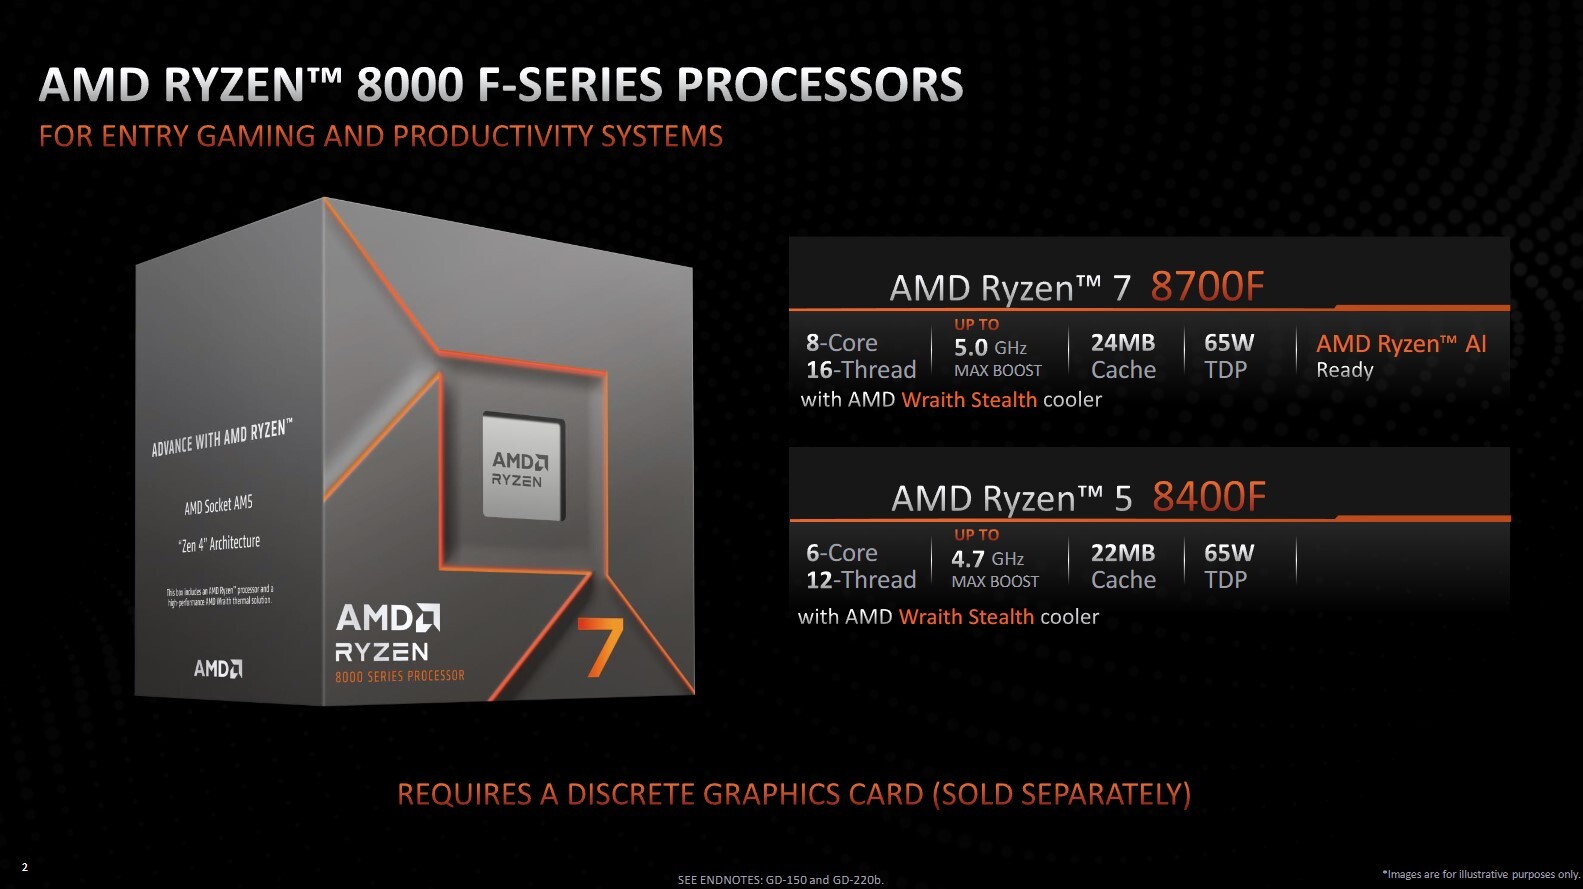 AMD introduces the Ryzen 7 8700F ($270) and Ryzen 5 8400F ($170) to the market.